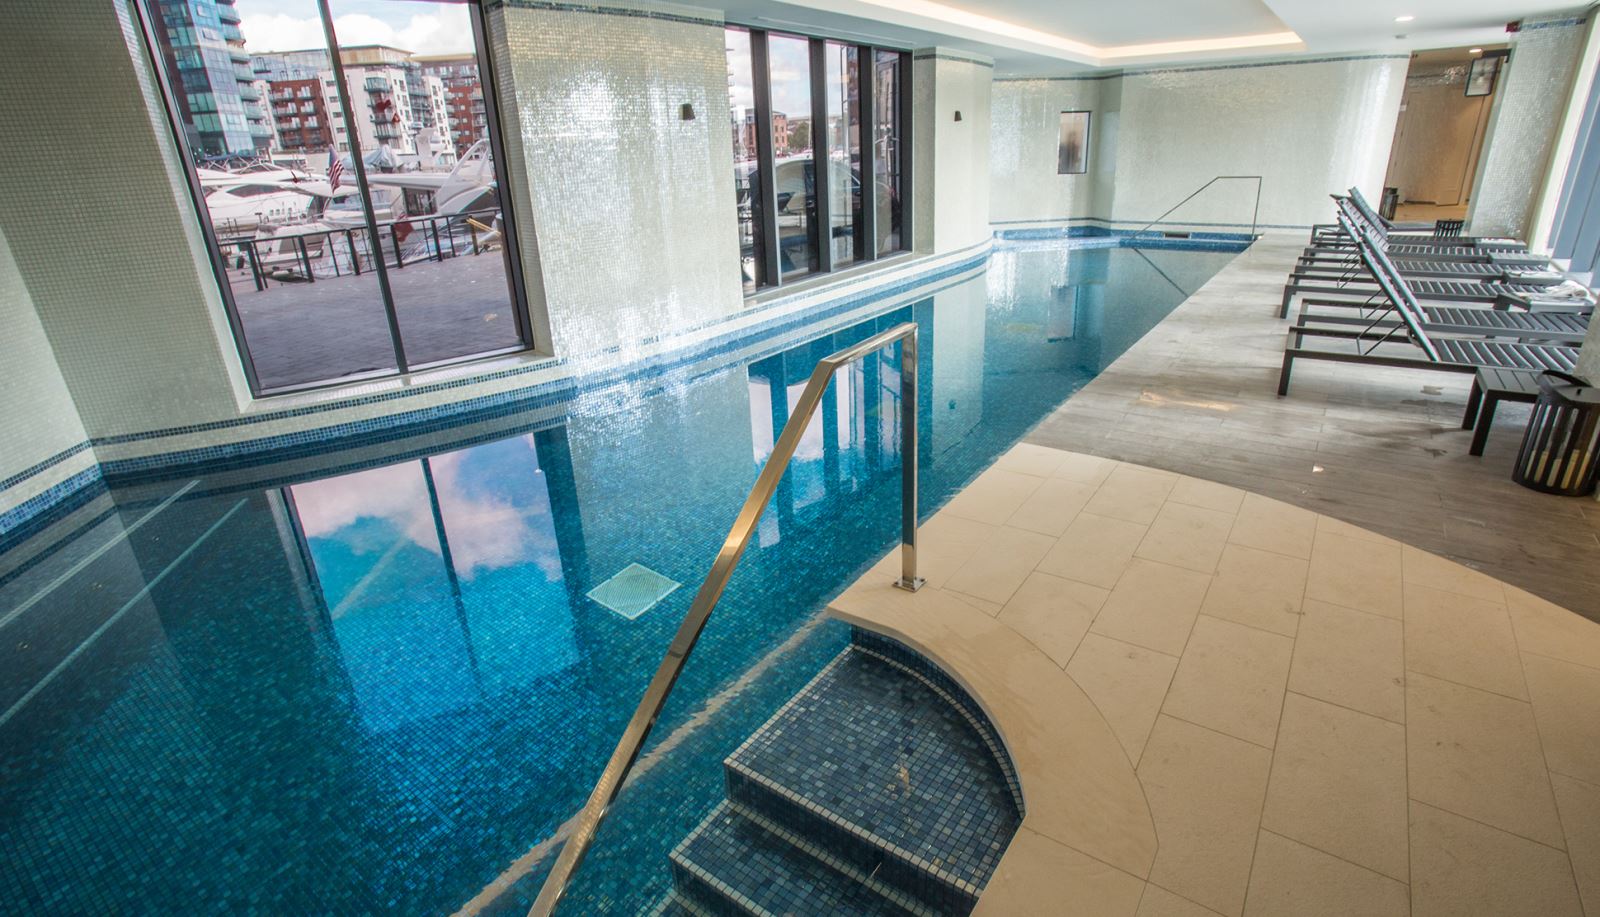 HarSPA's swimming pool at Southampton Harbour Hotel